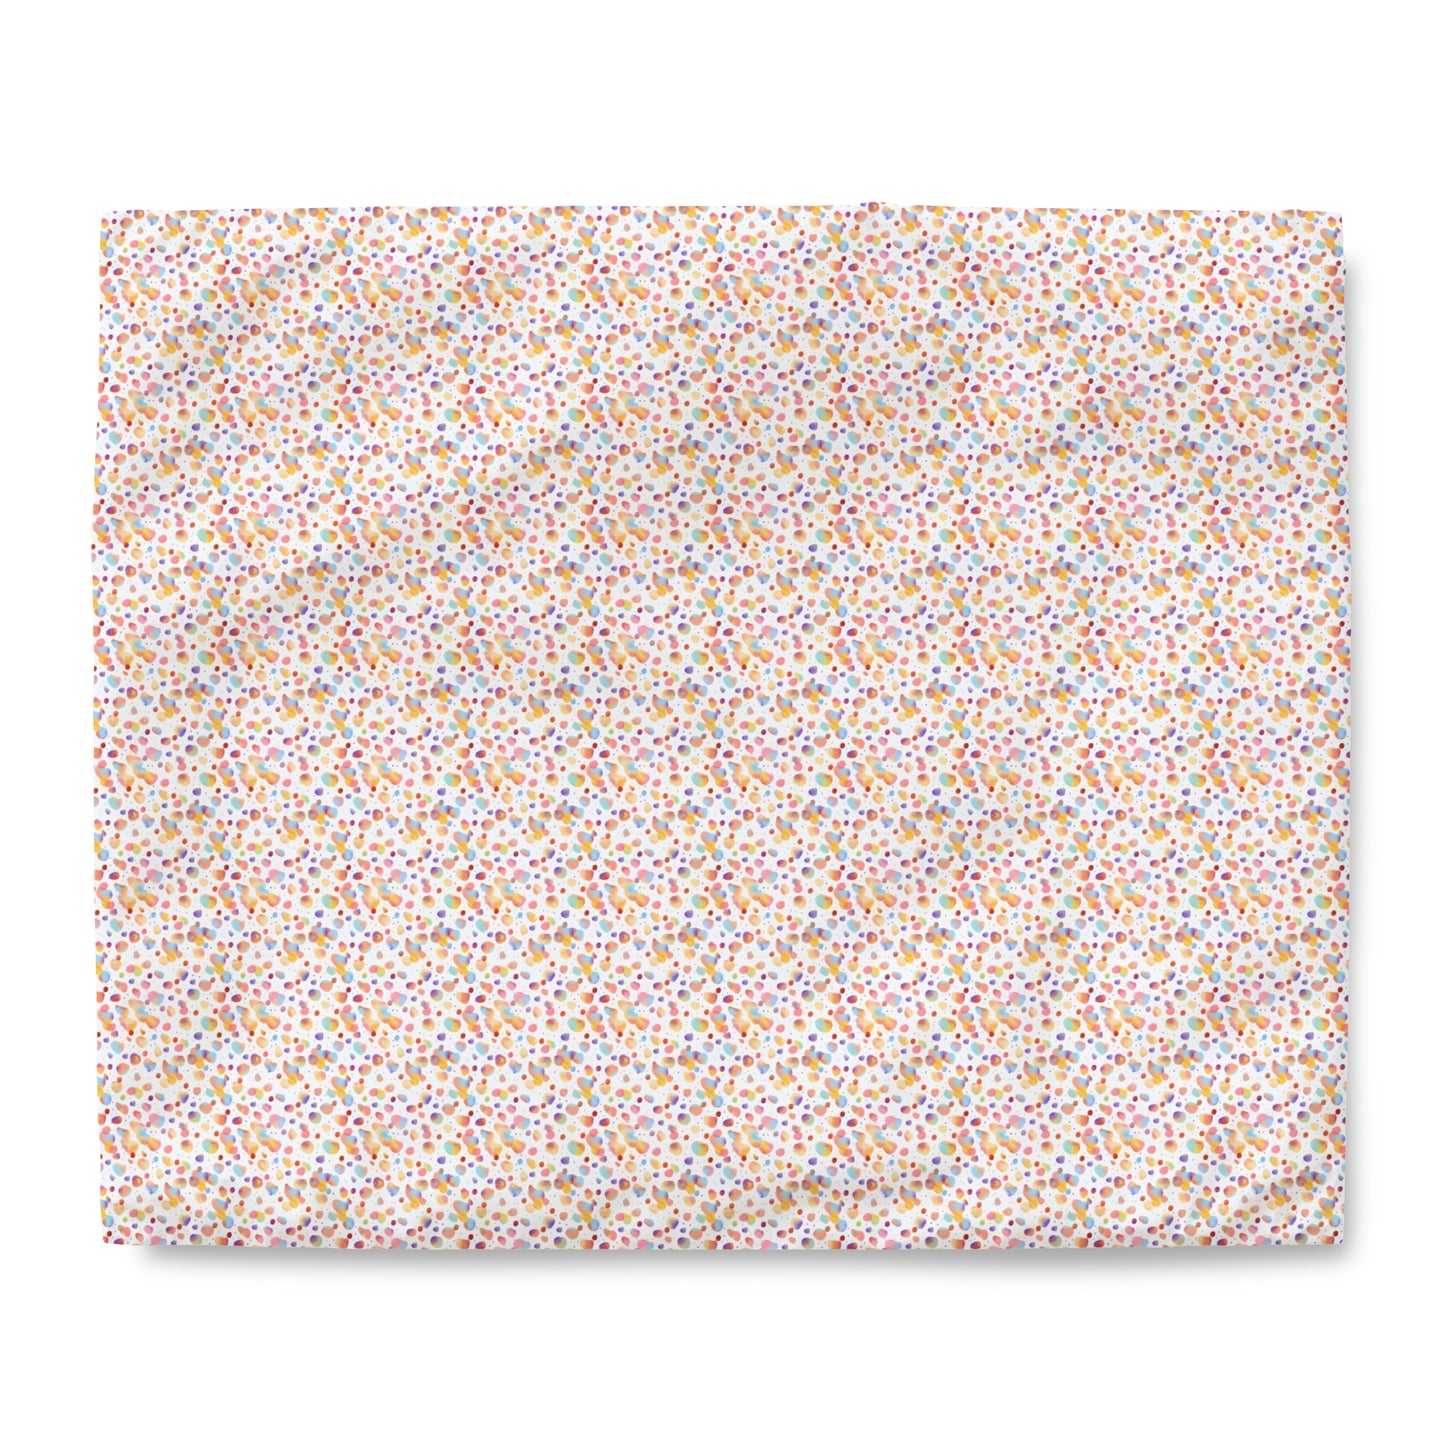 Niccie Pastel Abstract Pattern Duvet Cover Bedding for a Stylish